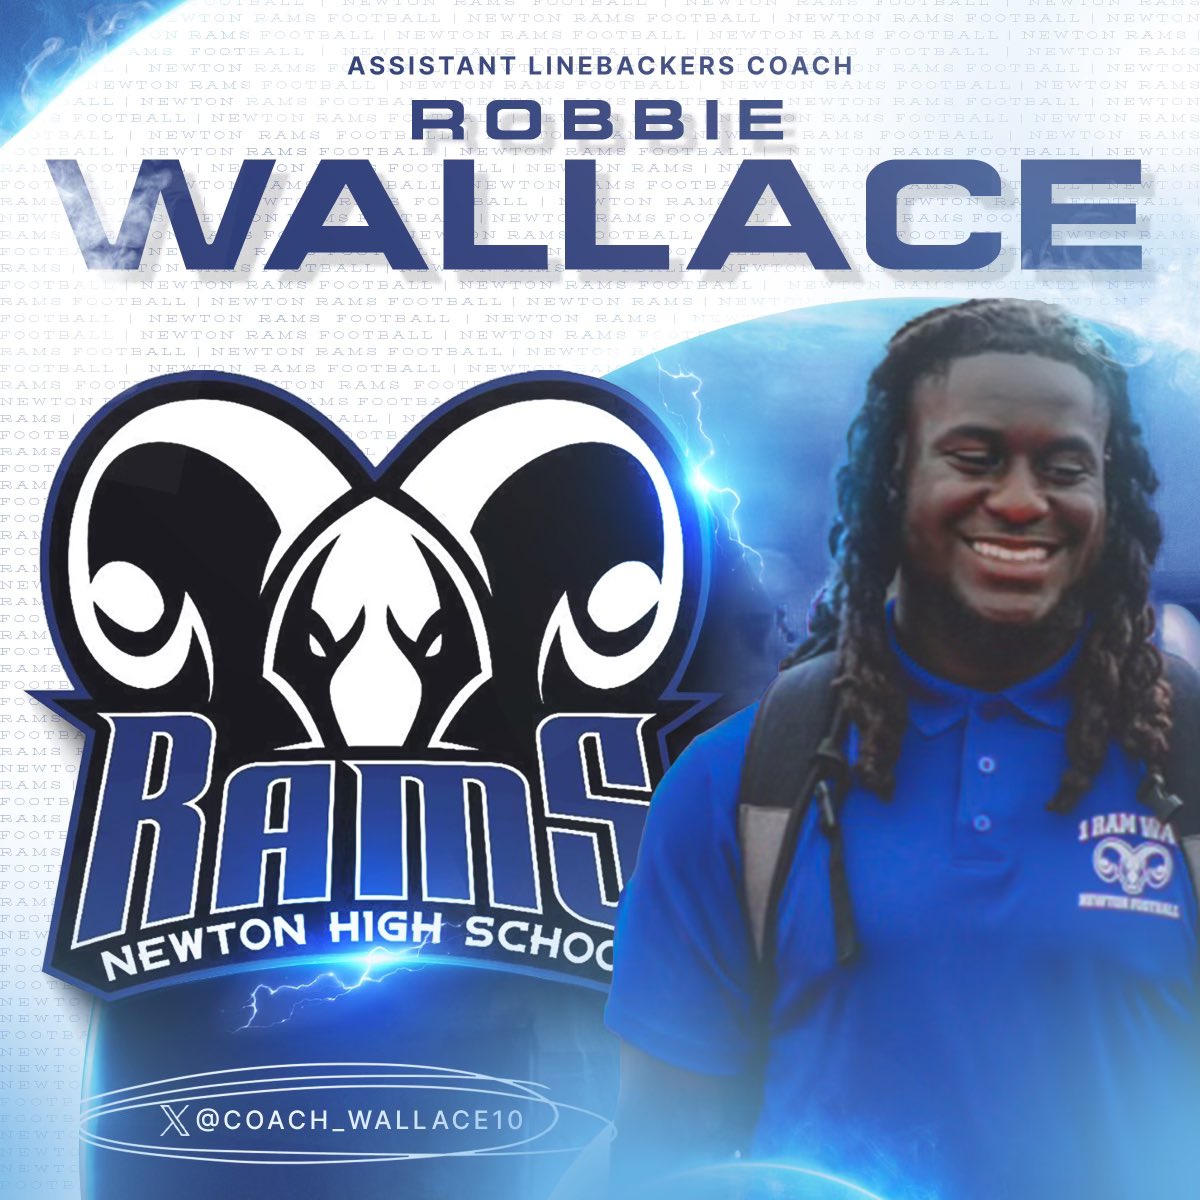 Help Me Welcome Coach Robbie Wallace @coach_wallace10 to the RAM Family🐏 ‼️ 🔵Played for Wingate University 🔵Newton HS Alumni 🔵All-American LB at Wingate University 🔵Played Pro Football for the AFI